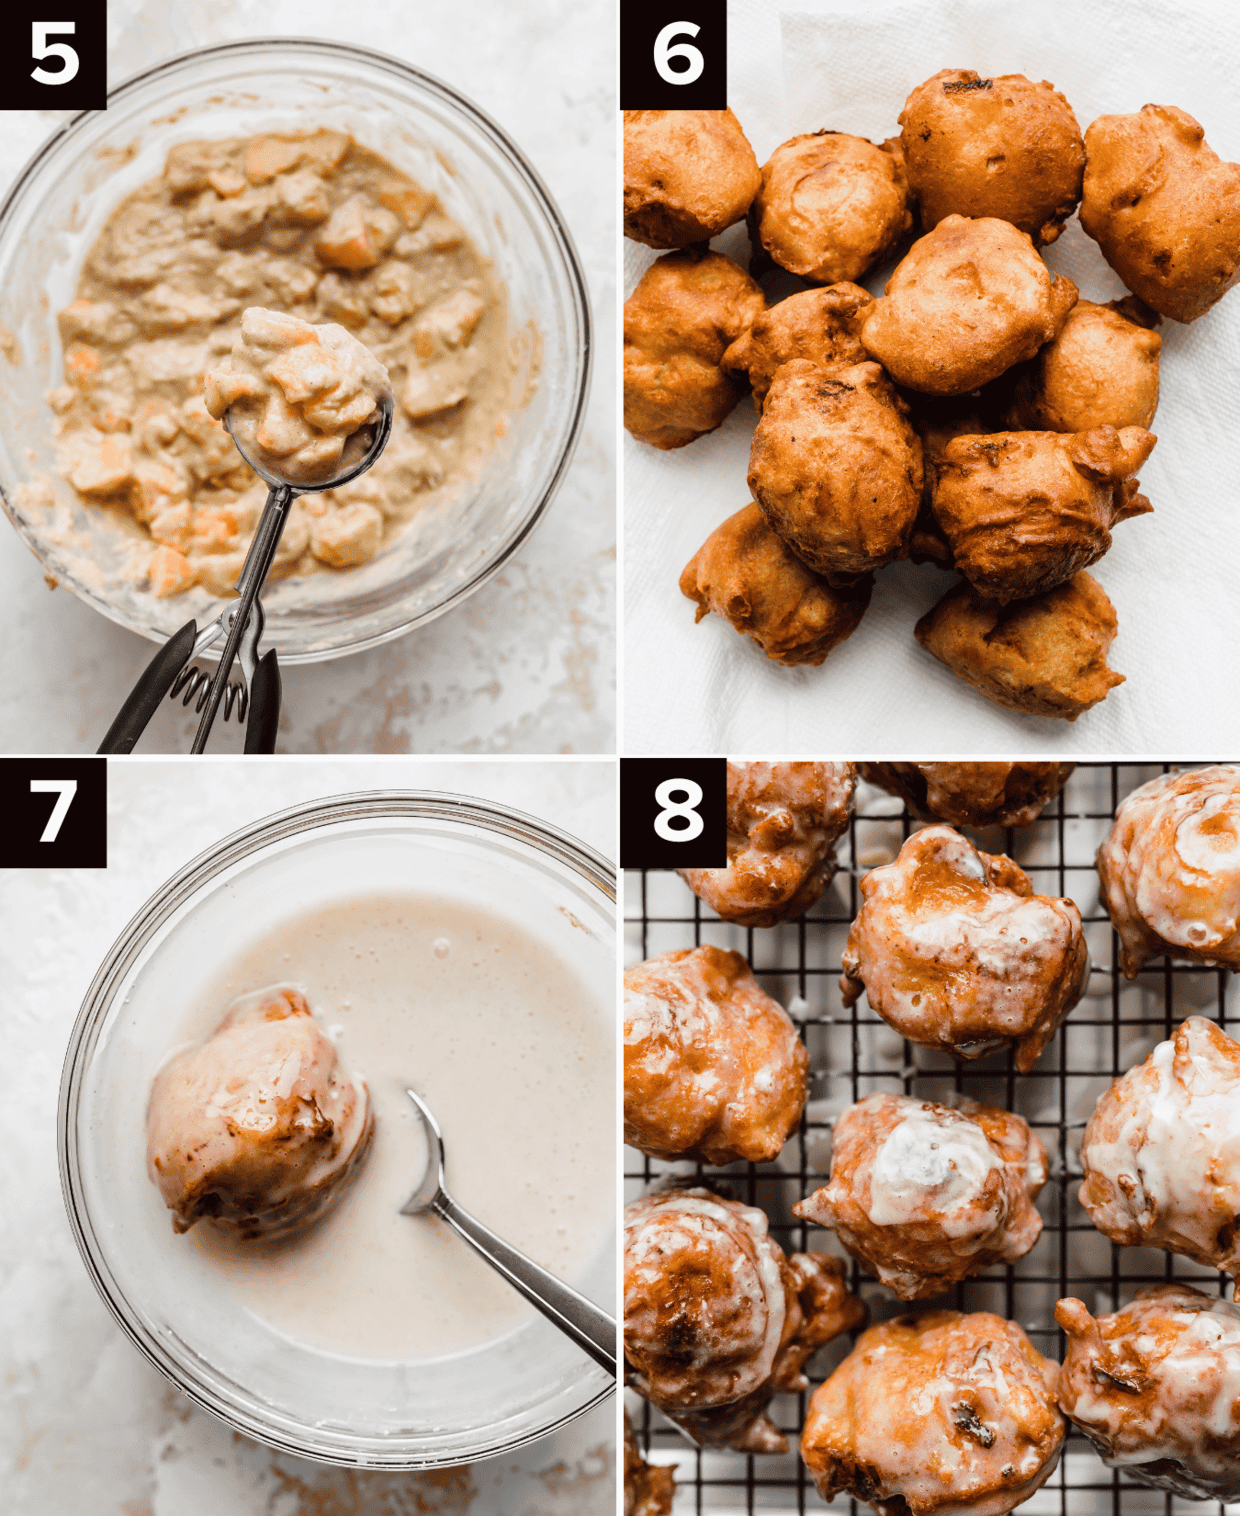 Four images showing how to make Peach Fritters, top left image is peach fritter batter being scooping by a cookie scoop, top right is fried Peach Fritters on paper towel, bottom left is a Peach Fritter in a bowl of white glaze, bottom right is glazed covered Peach Fritters on a cooling rack.